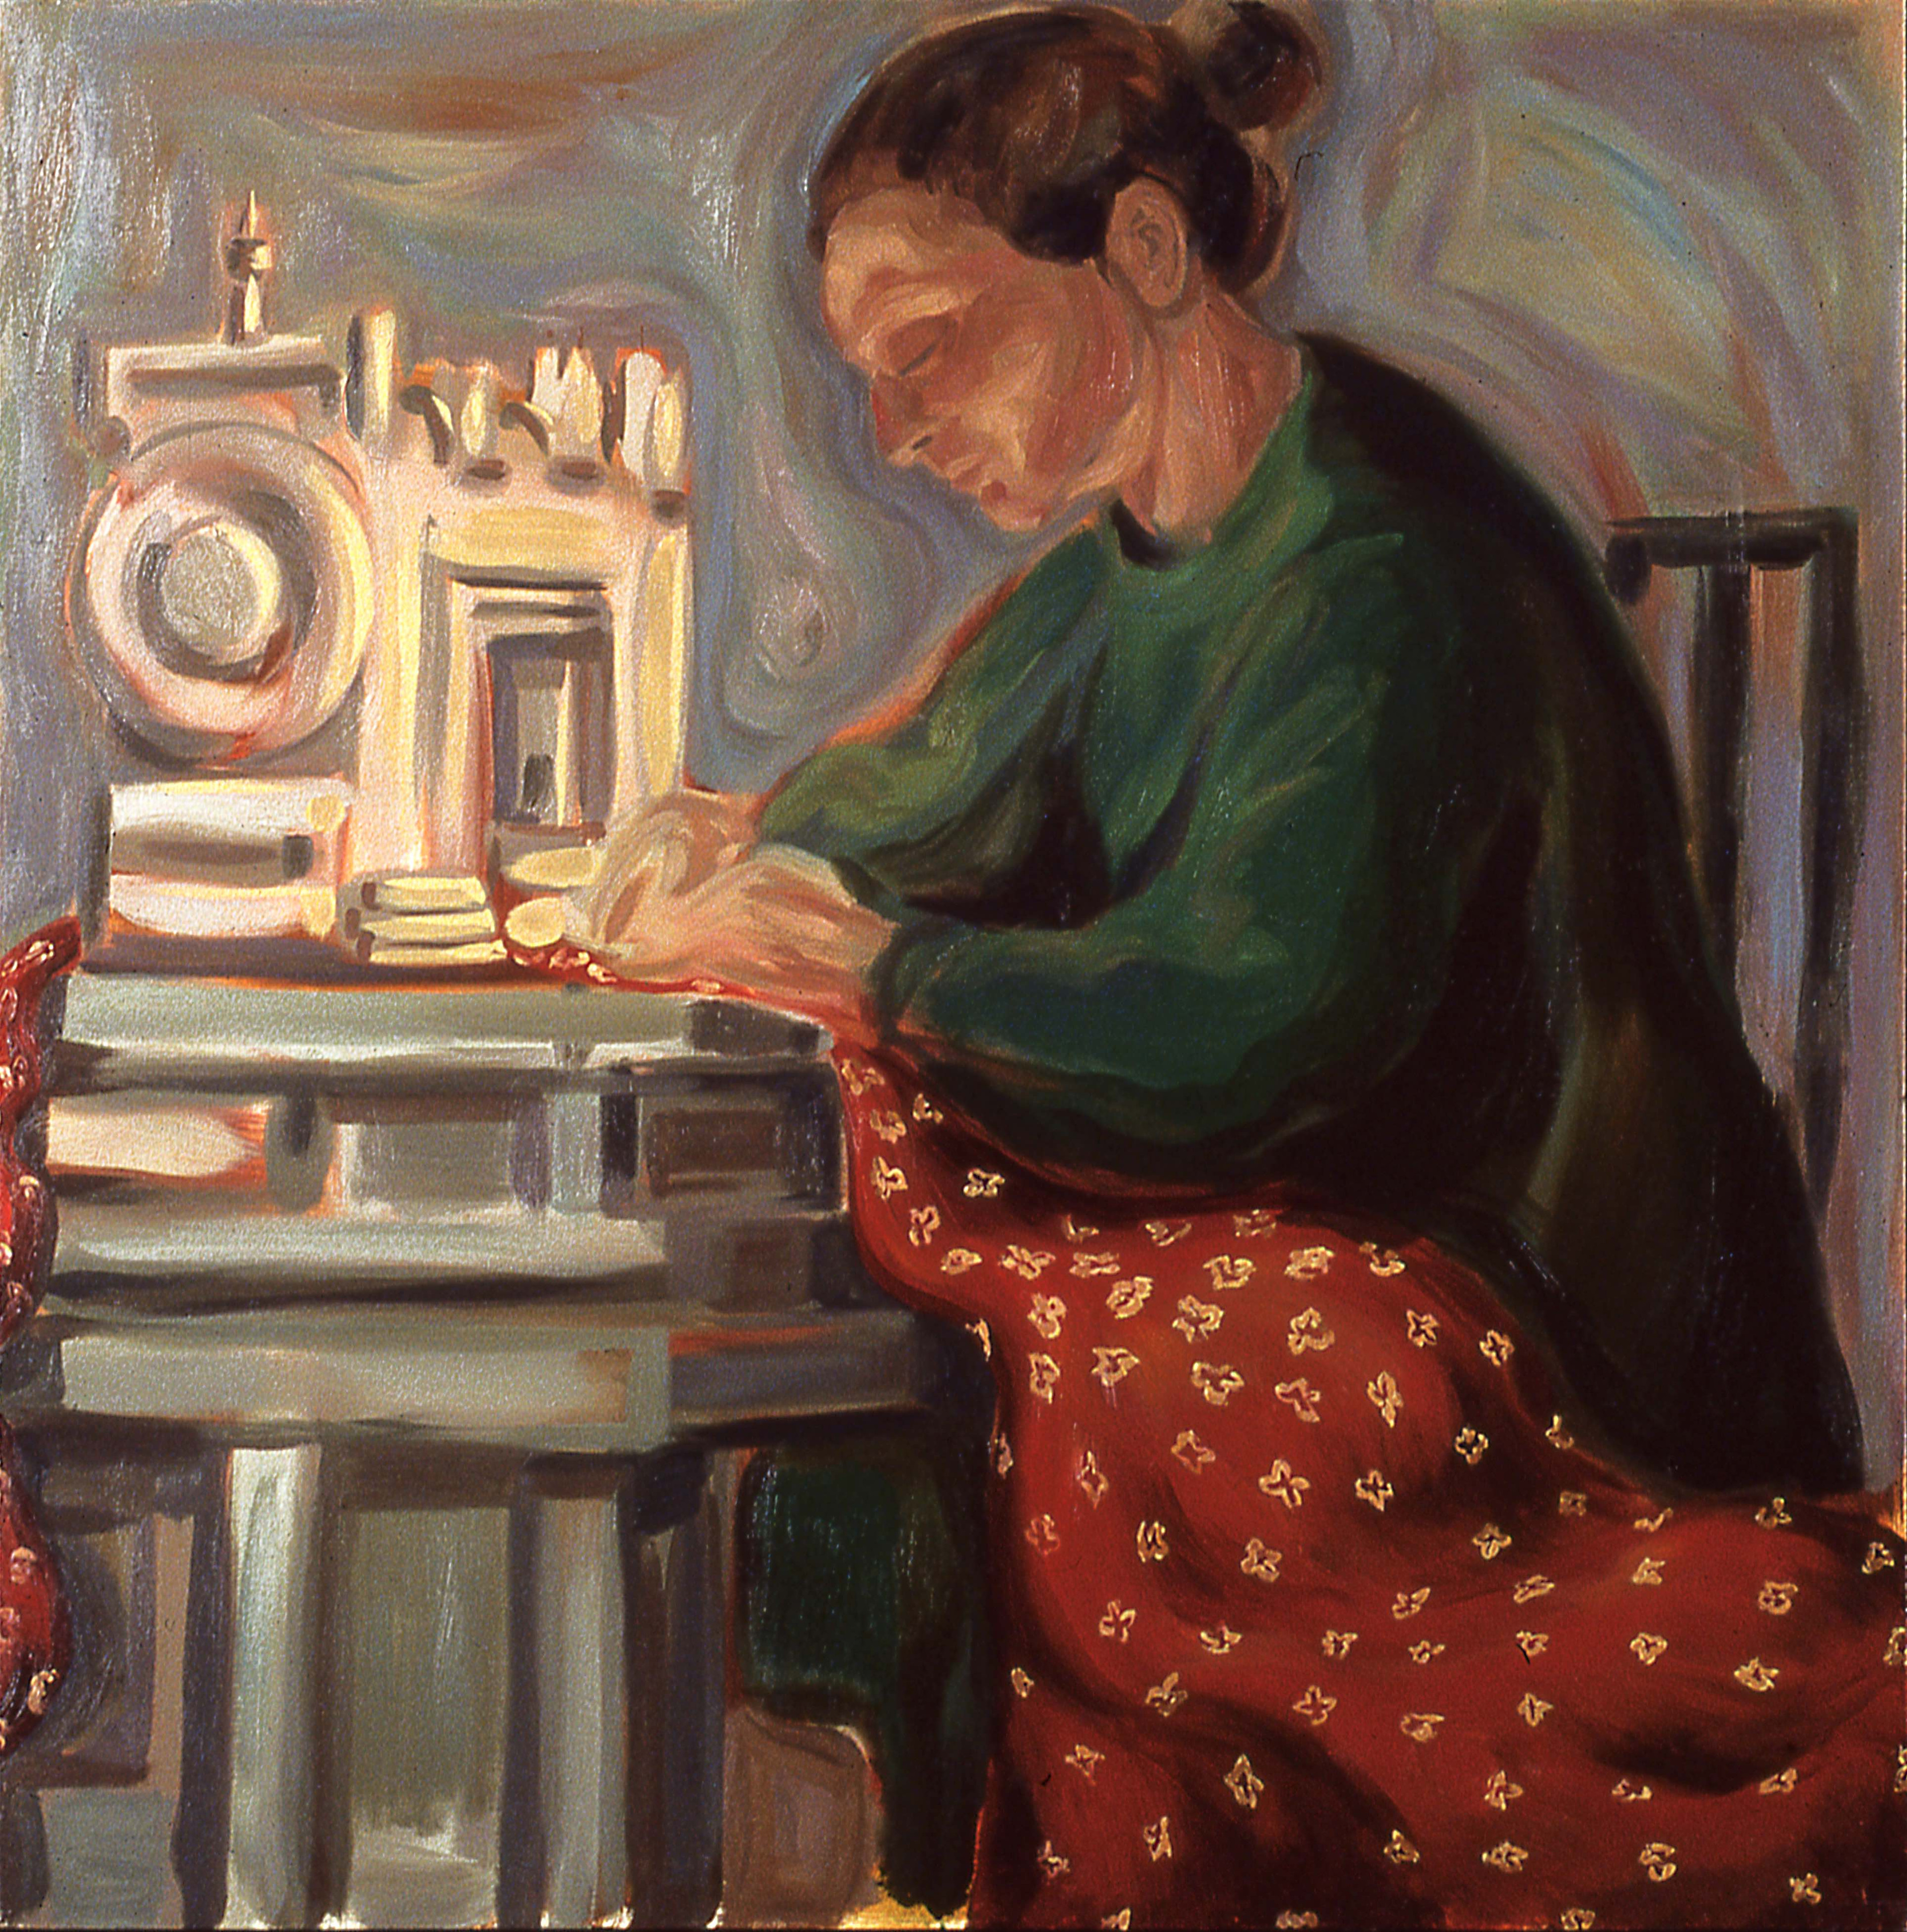 WORK IS THE CONDITION FOR EQUALITY #3, painted by Vince Mancuso in 1991, oil on canvas 4x5 feet